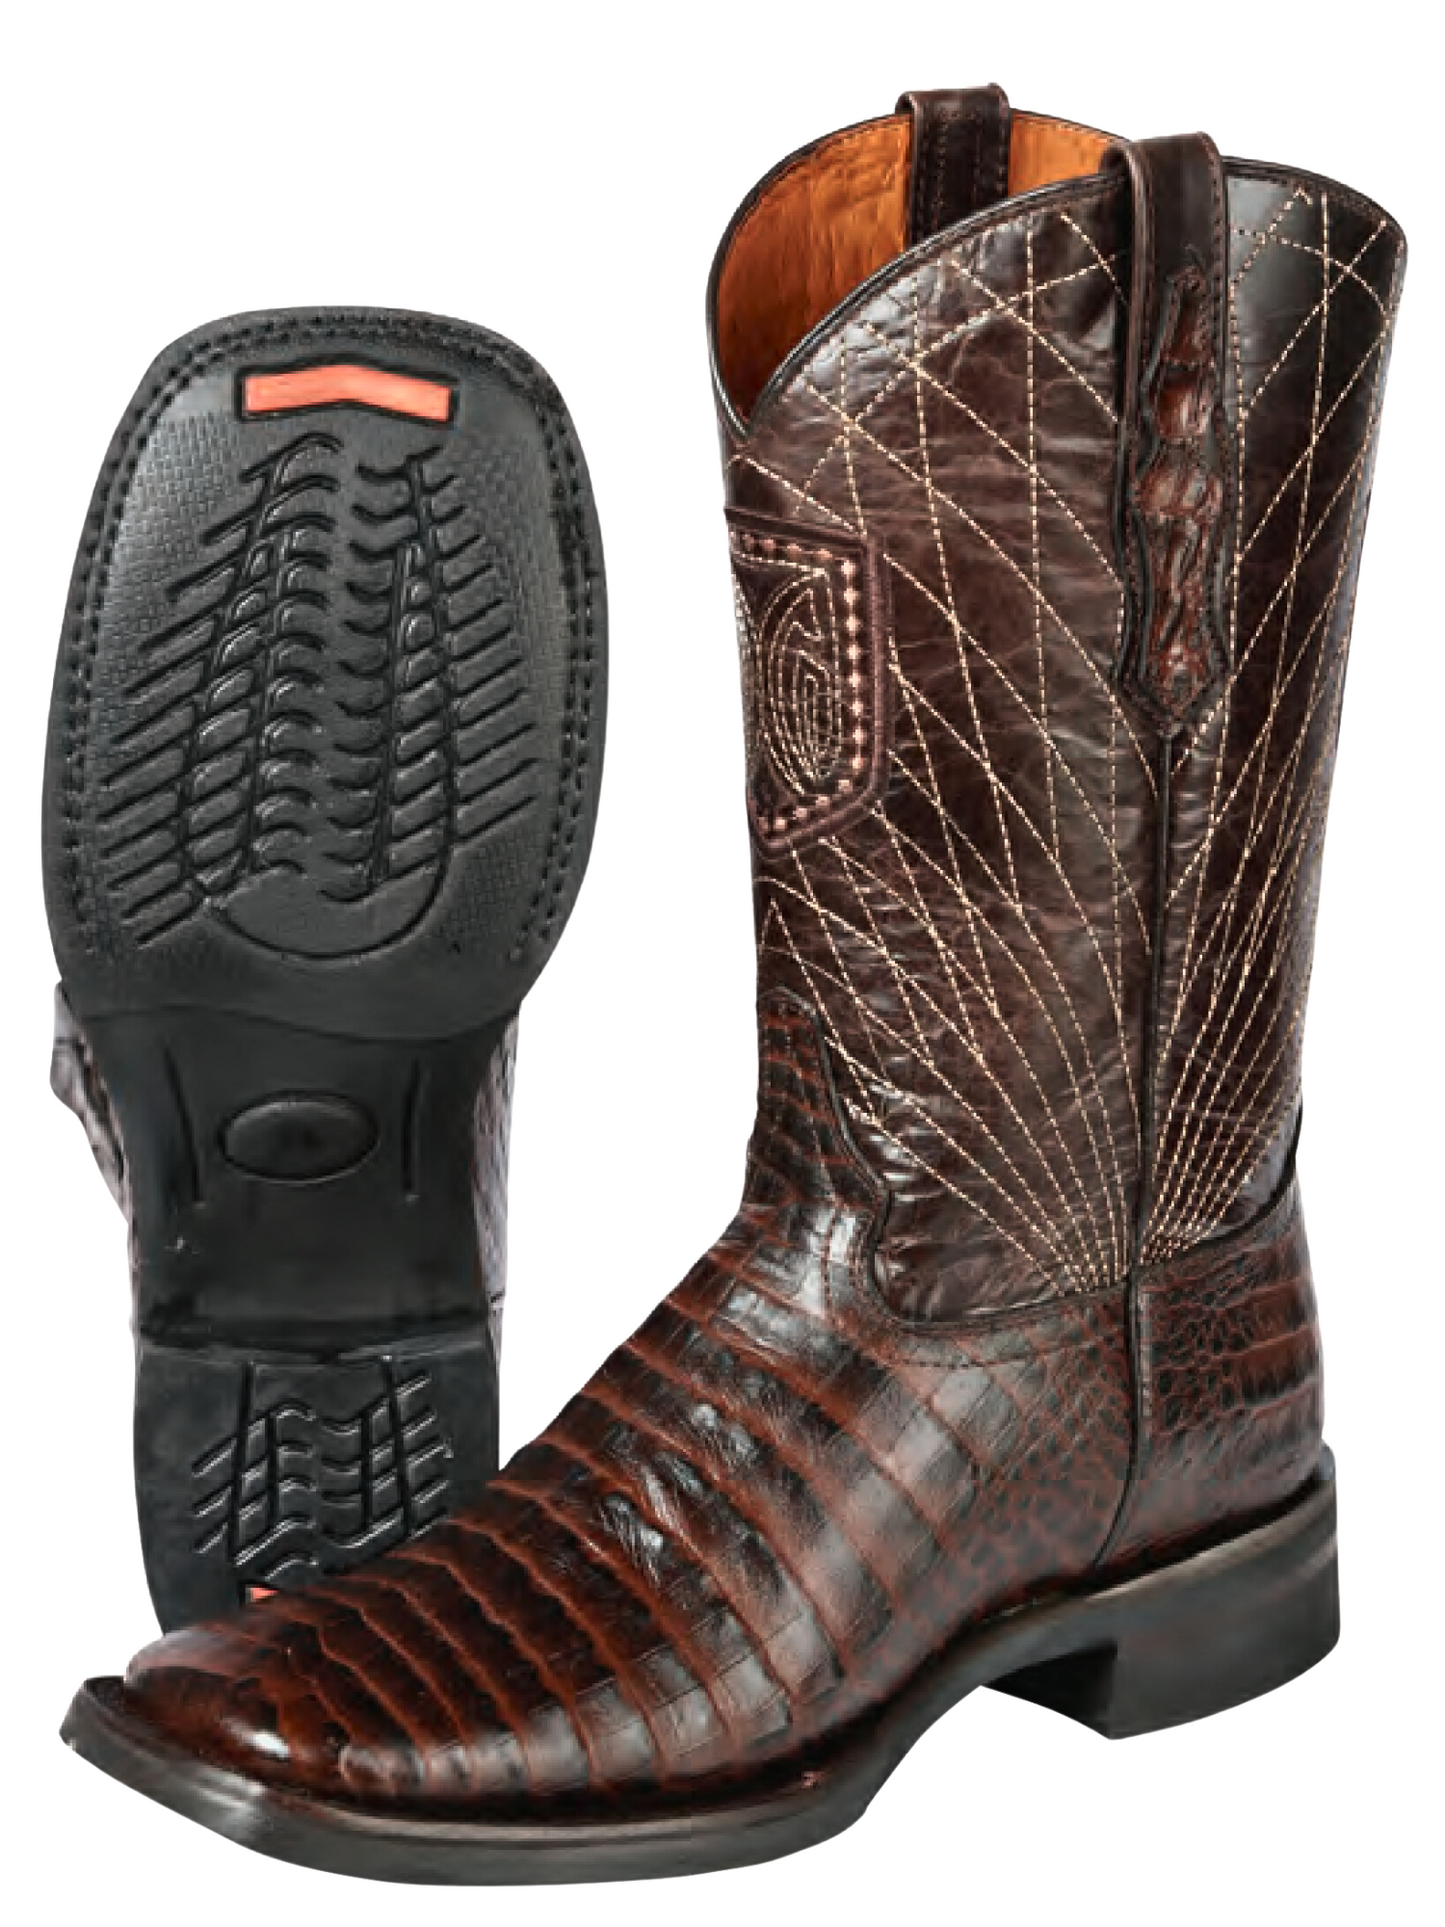 Rodeo Cowboy Boots Imitation of Caiman Belly Engraved in Cowhide Leather for Men 'El General' - ID: 44672 Cowboy Boots El General